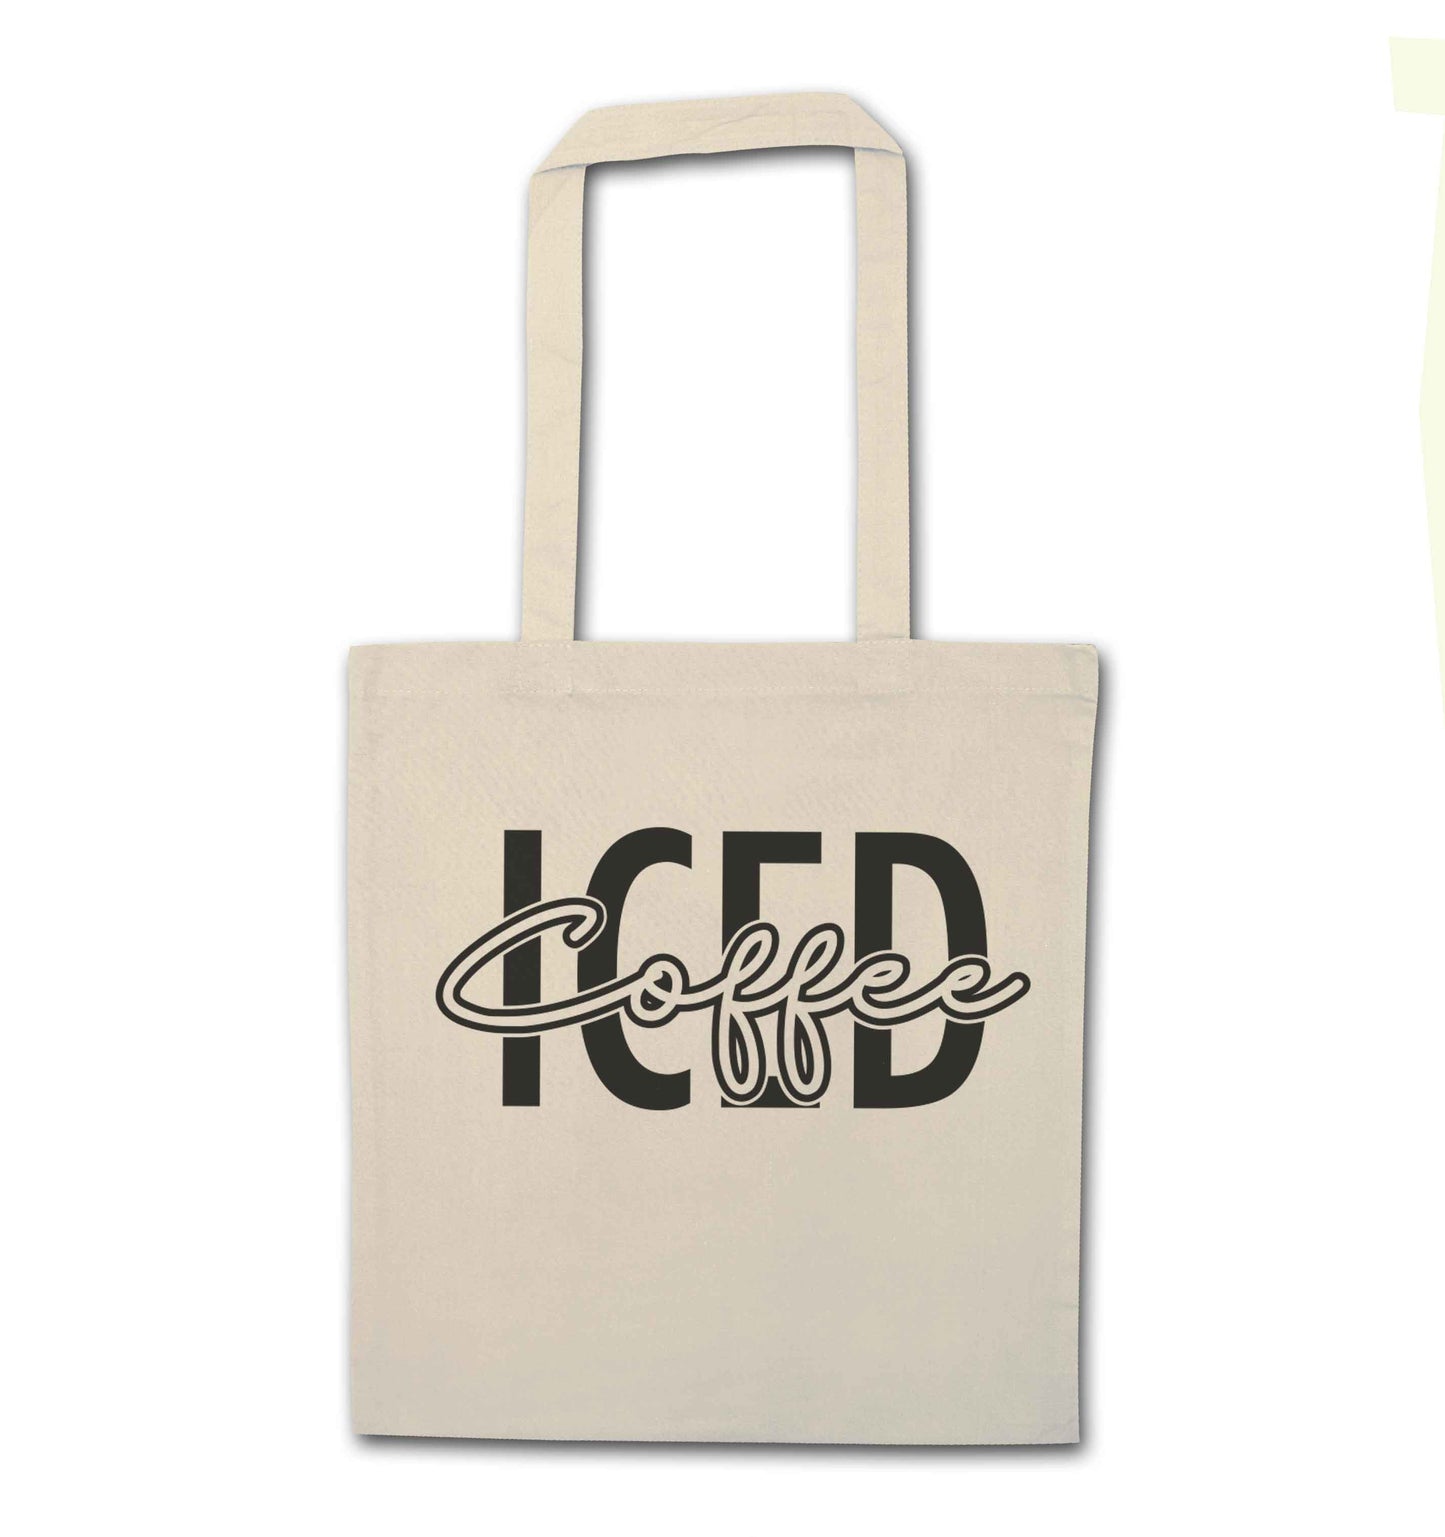 Iced Coffee natural tote bag